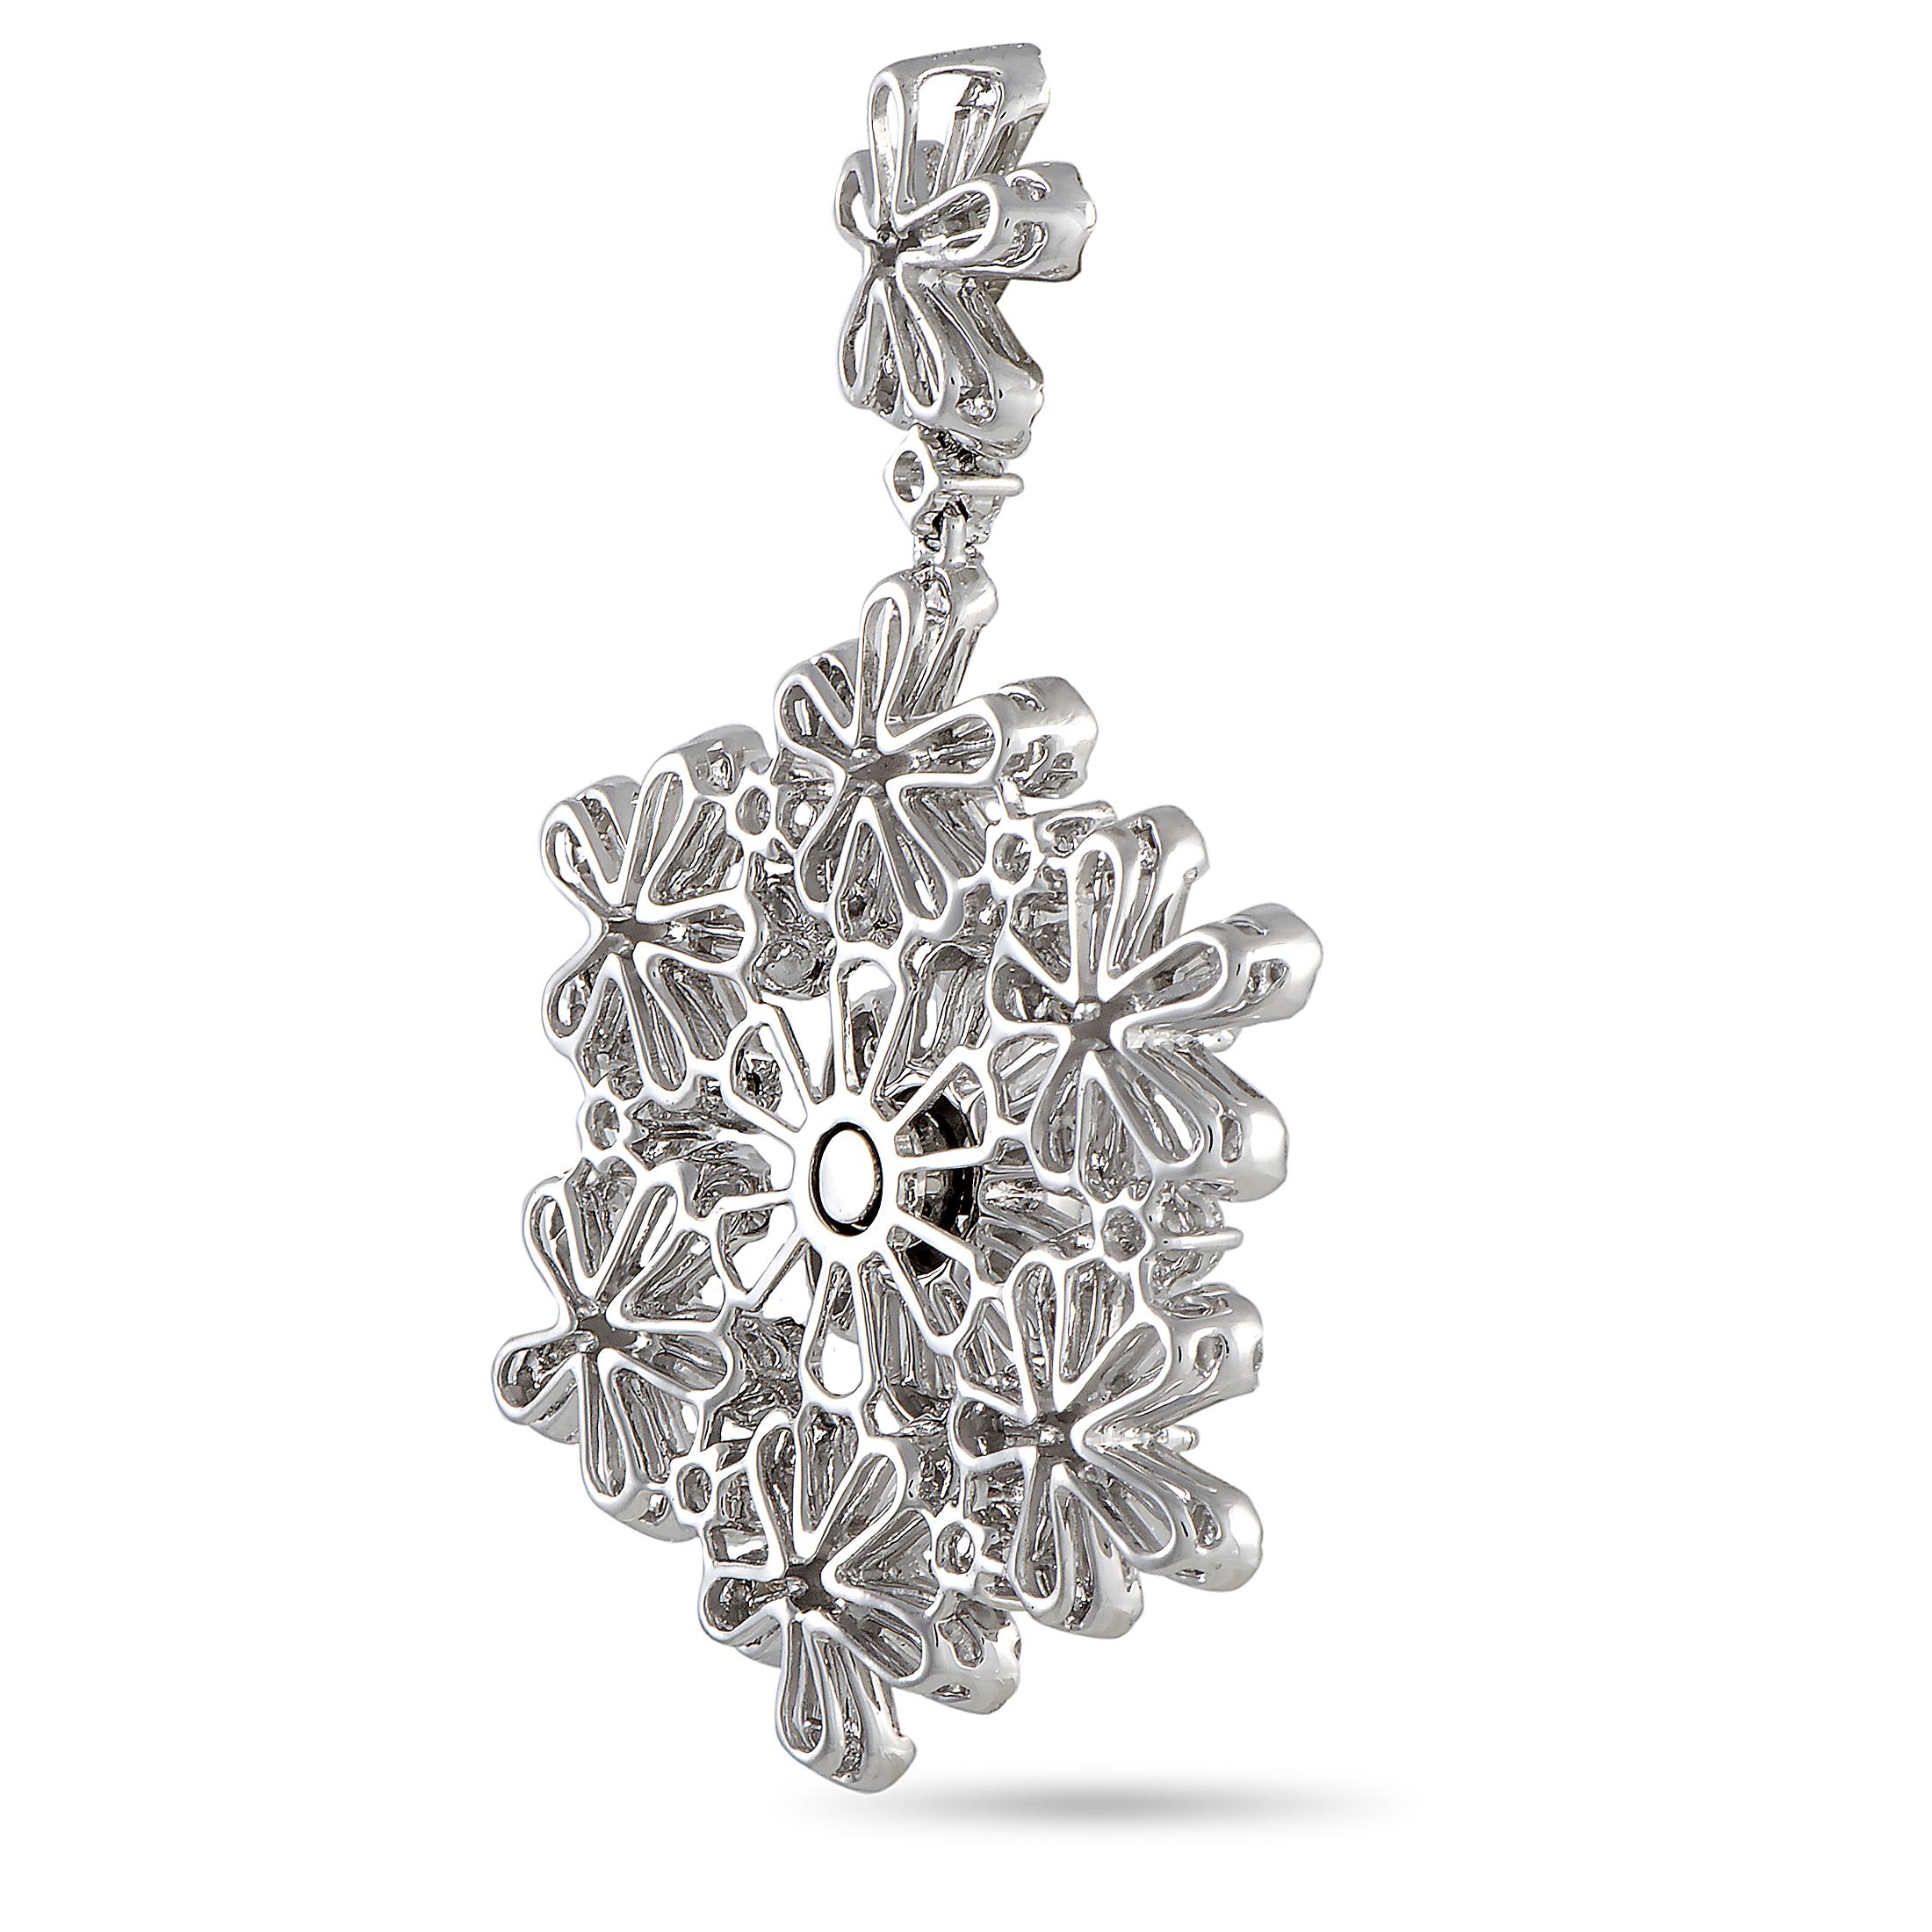 This LB Exclusive pendant is crafted from 18K white gold and weighs 18.7 grams. It is set with round and baguette diamond stones that amount to, respectively, 3.25 and 5.92 carats. The pendant measures 2.20” in length and 1.10” in width.
 
 Offered